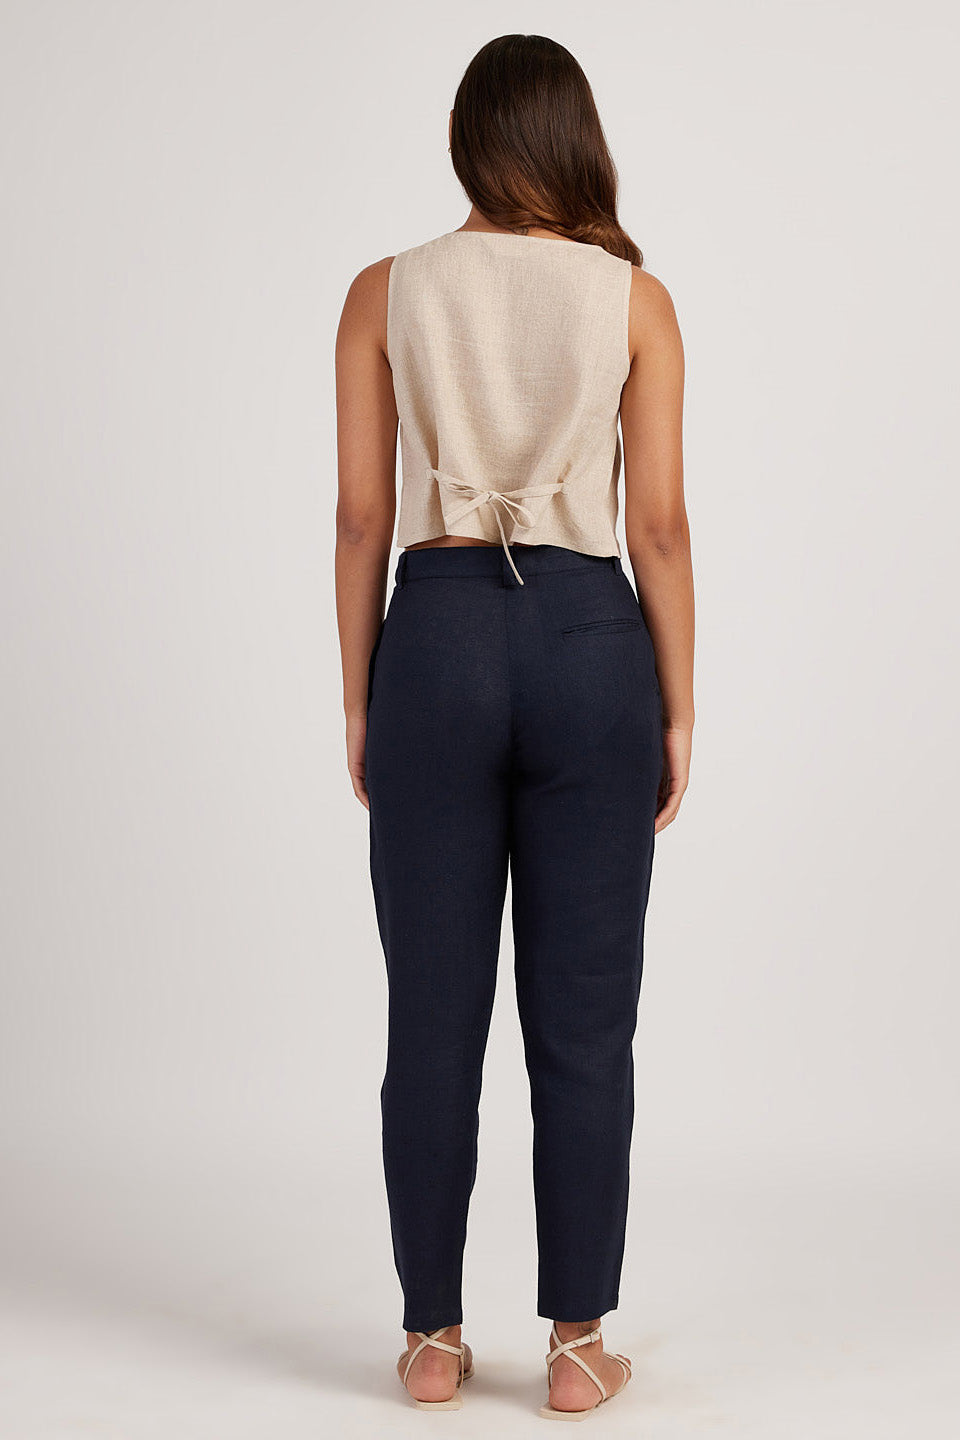 Trousers for Women - The Linen Pleated Trousers for Women Indigo | Creatures of Habit